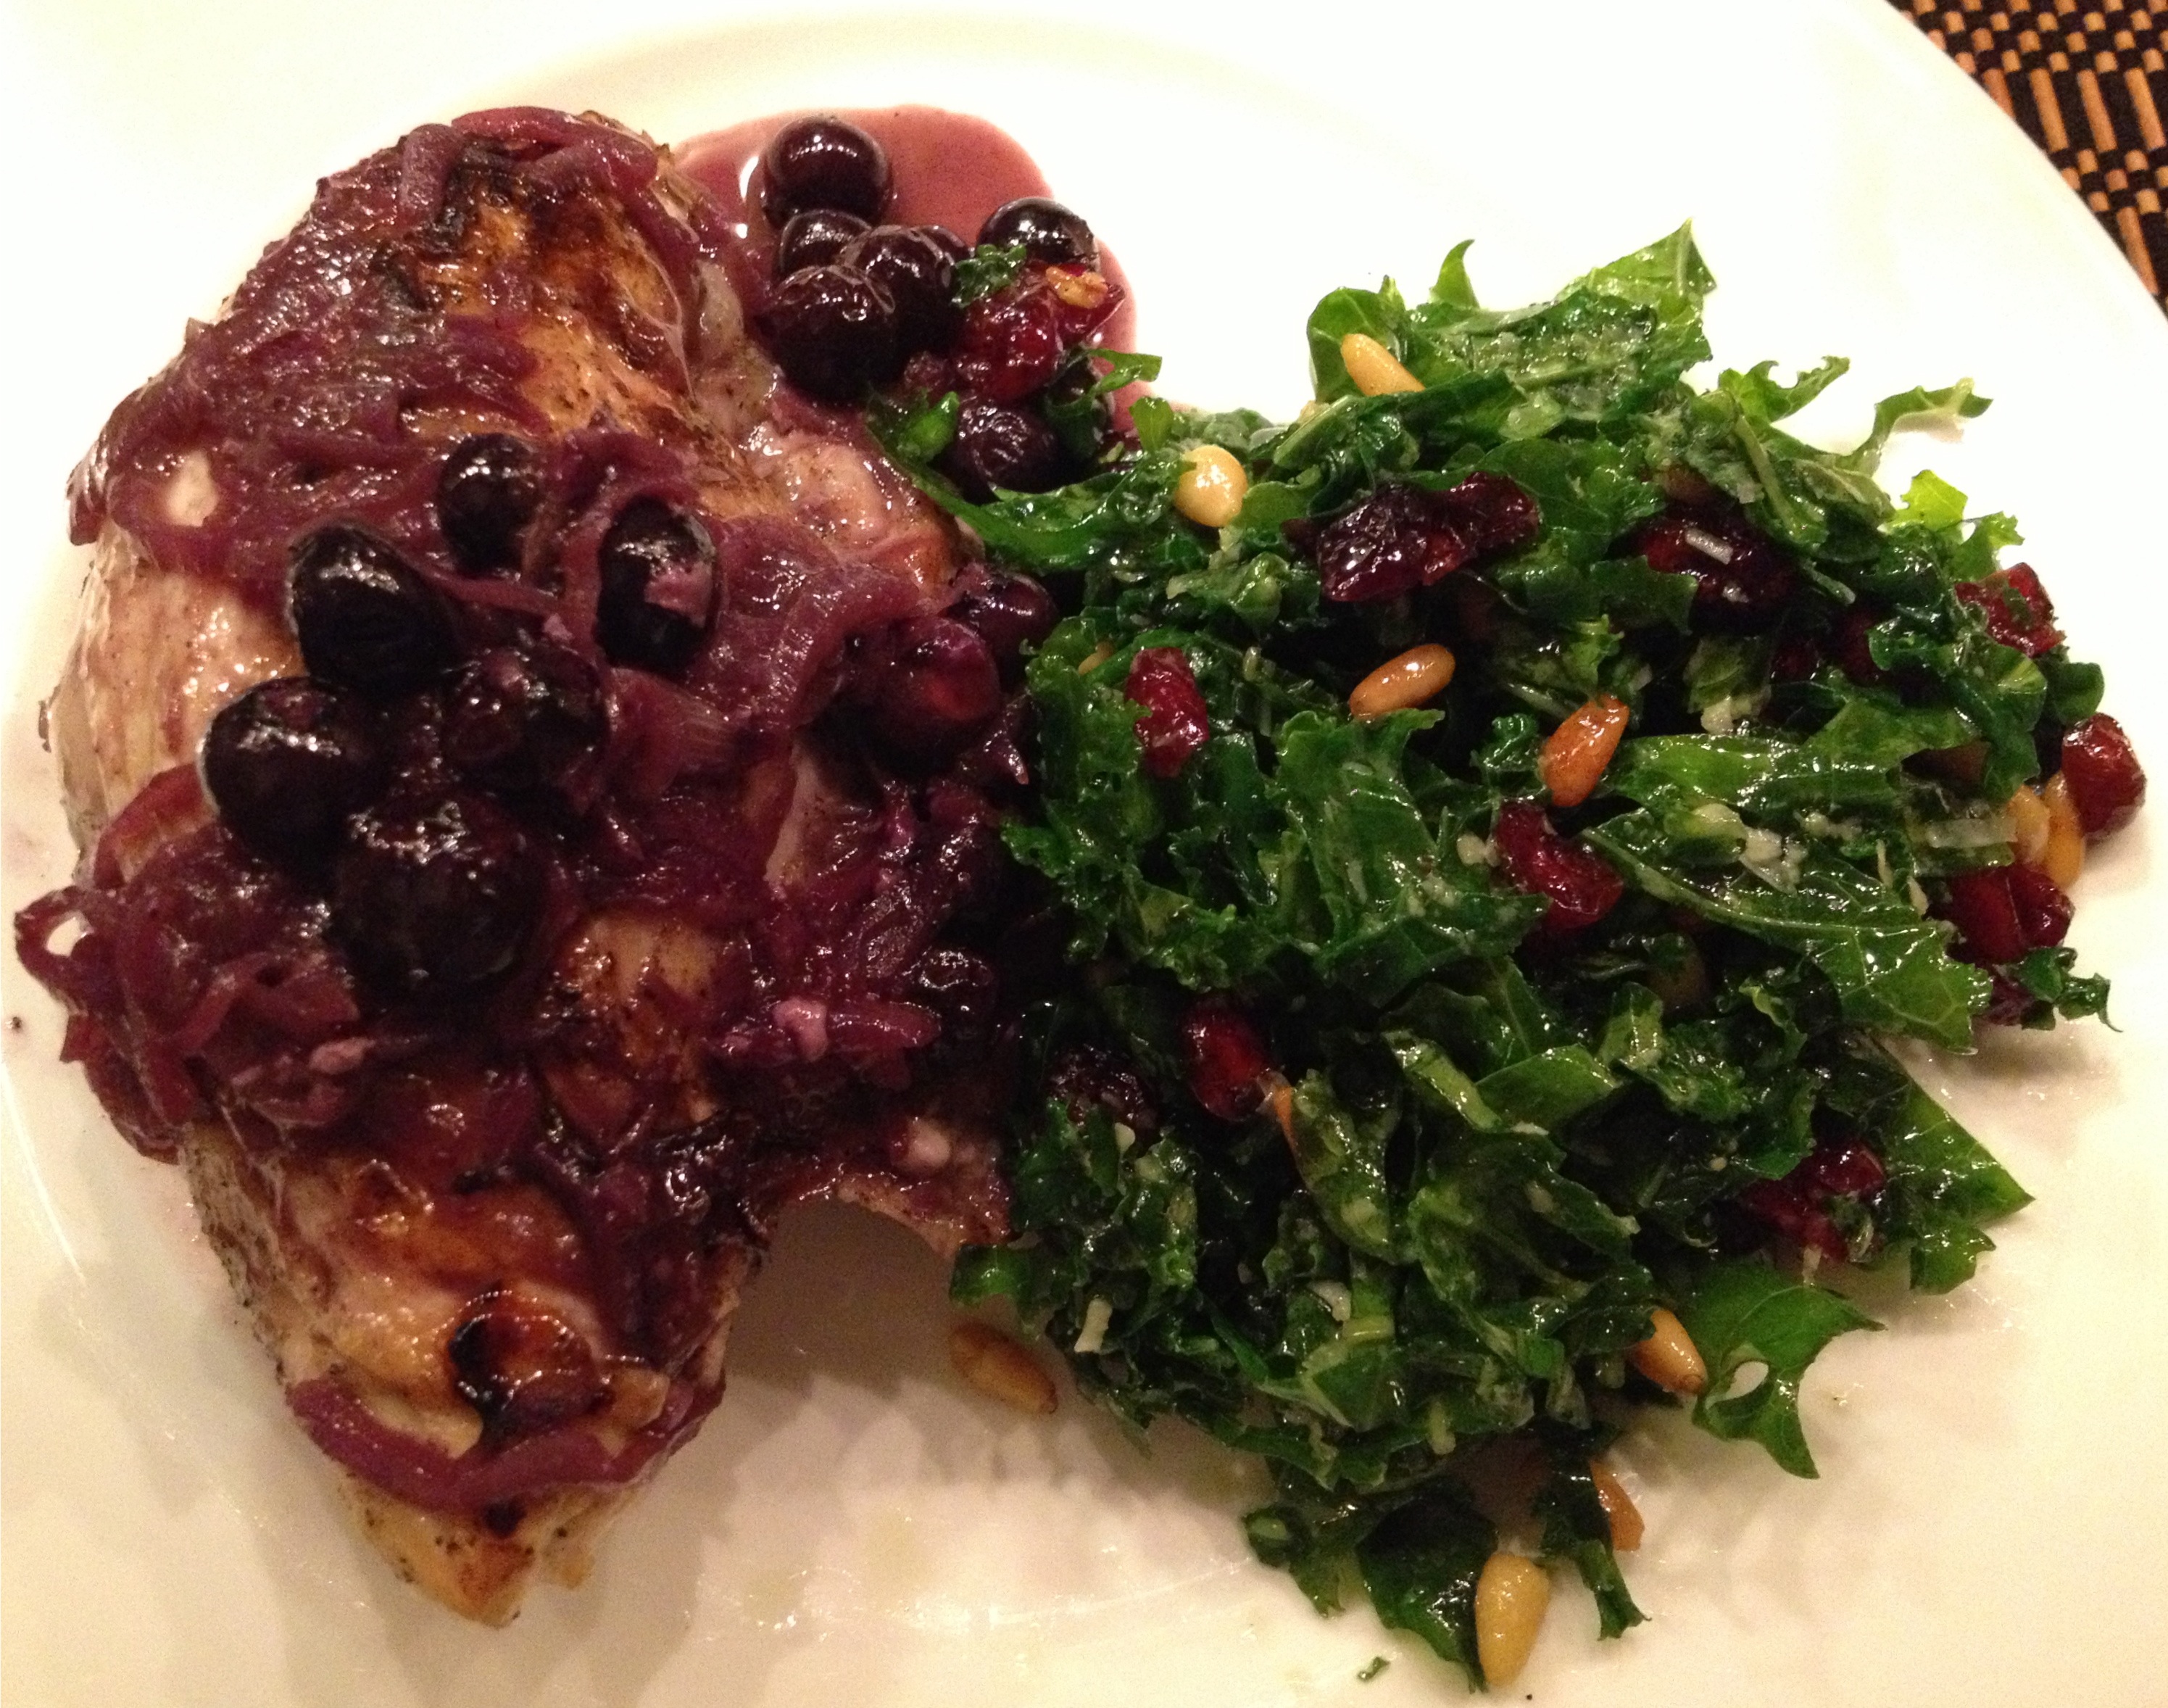 kale salad with sauteed chicken breast in white wine, shallots and blueberries